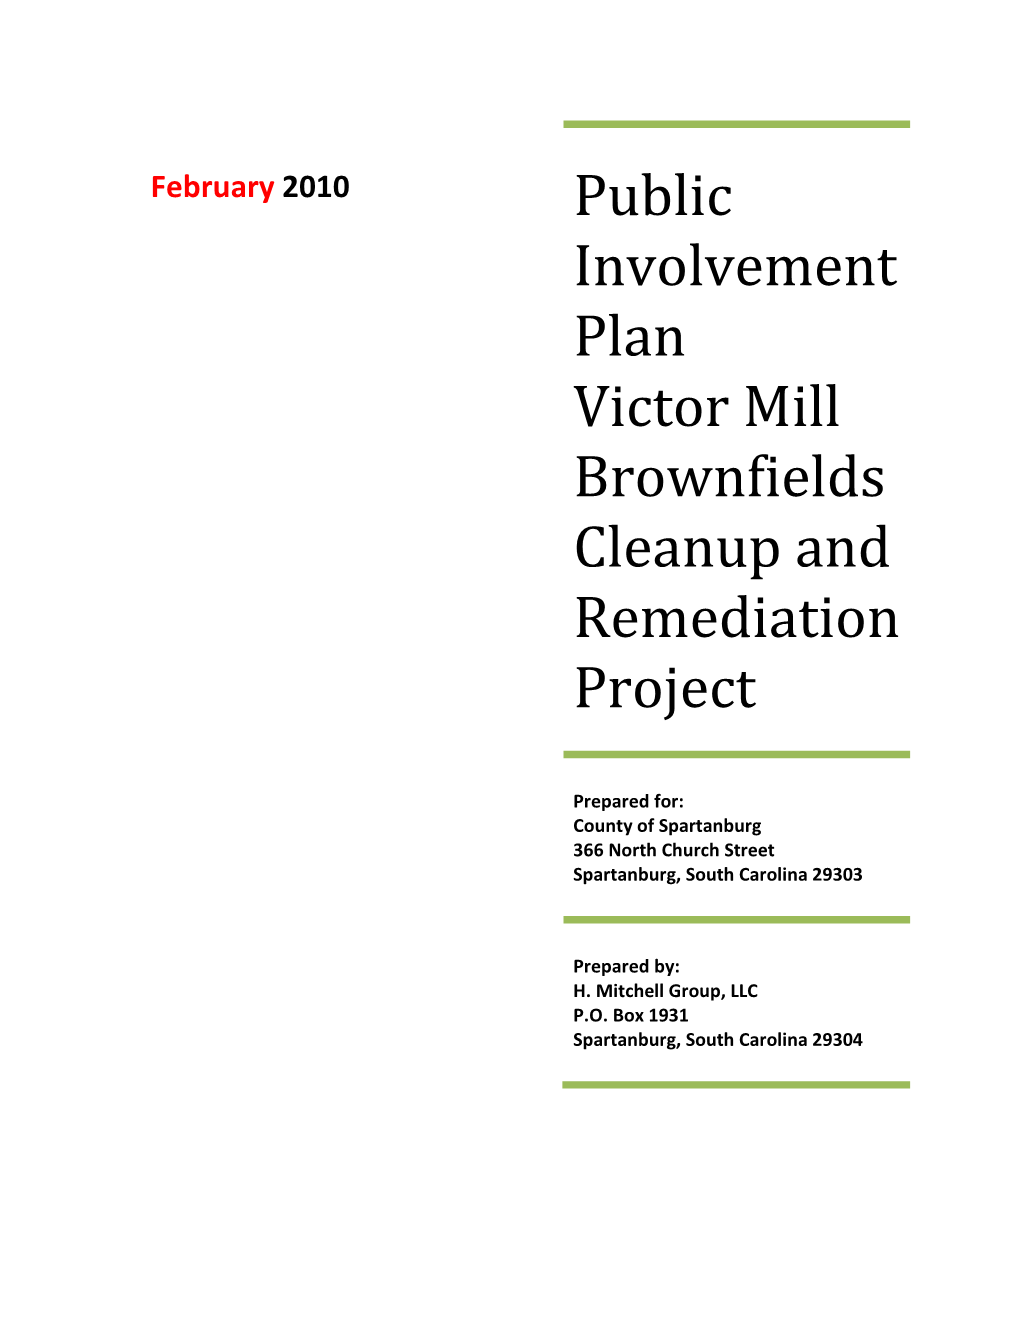 Public Involvement Plan Victor Mill Brownfields Cleanup and Remediation Project